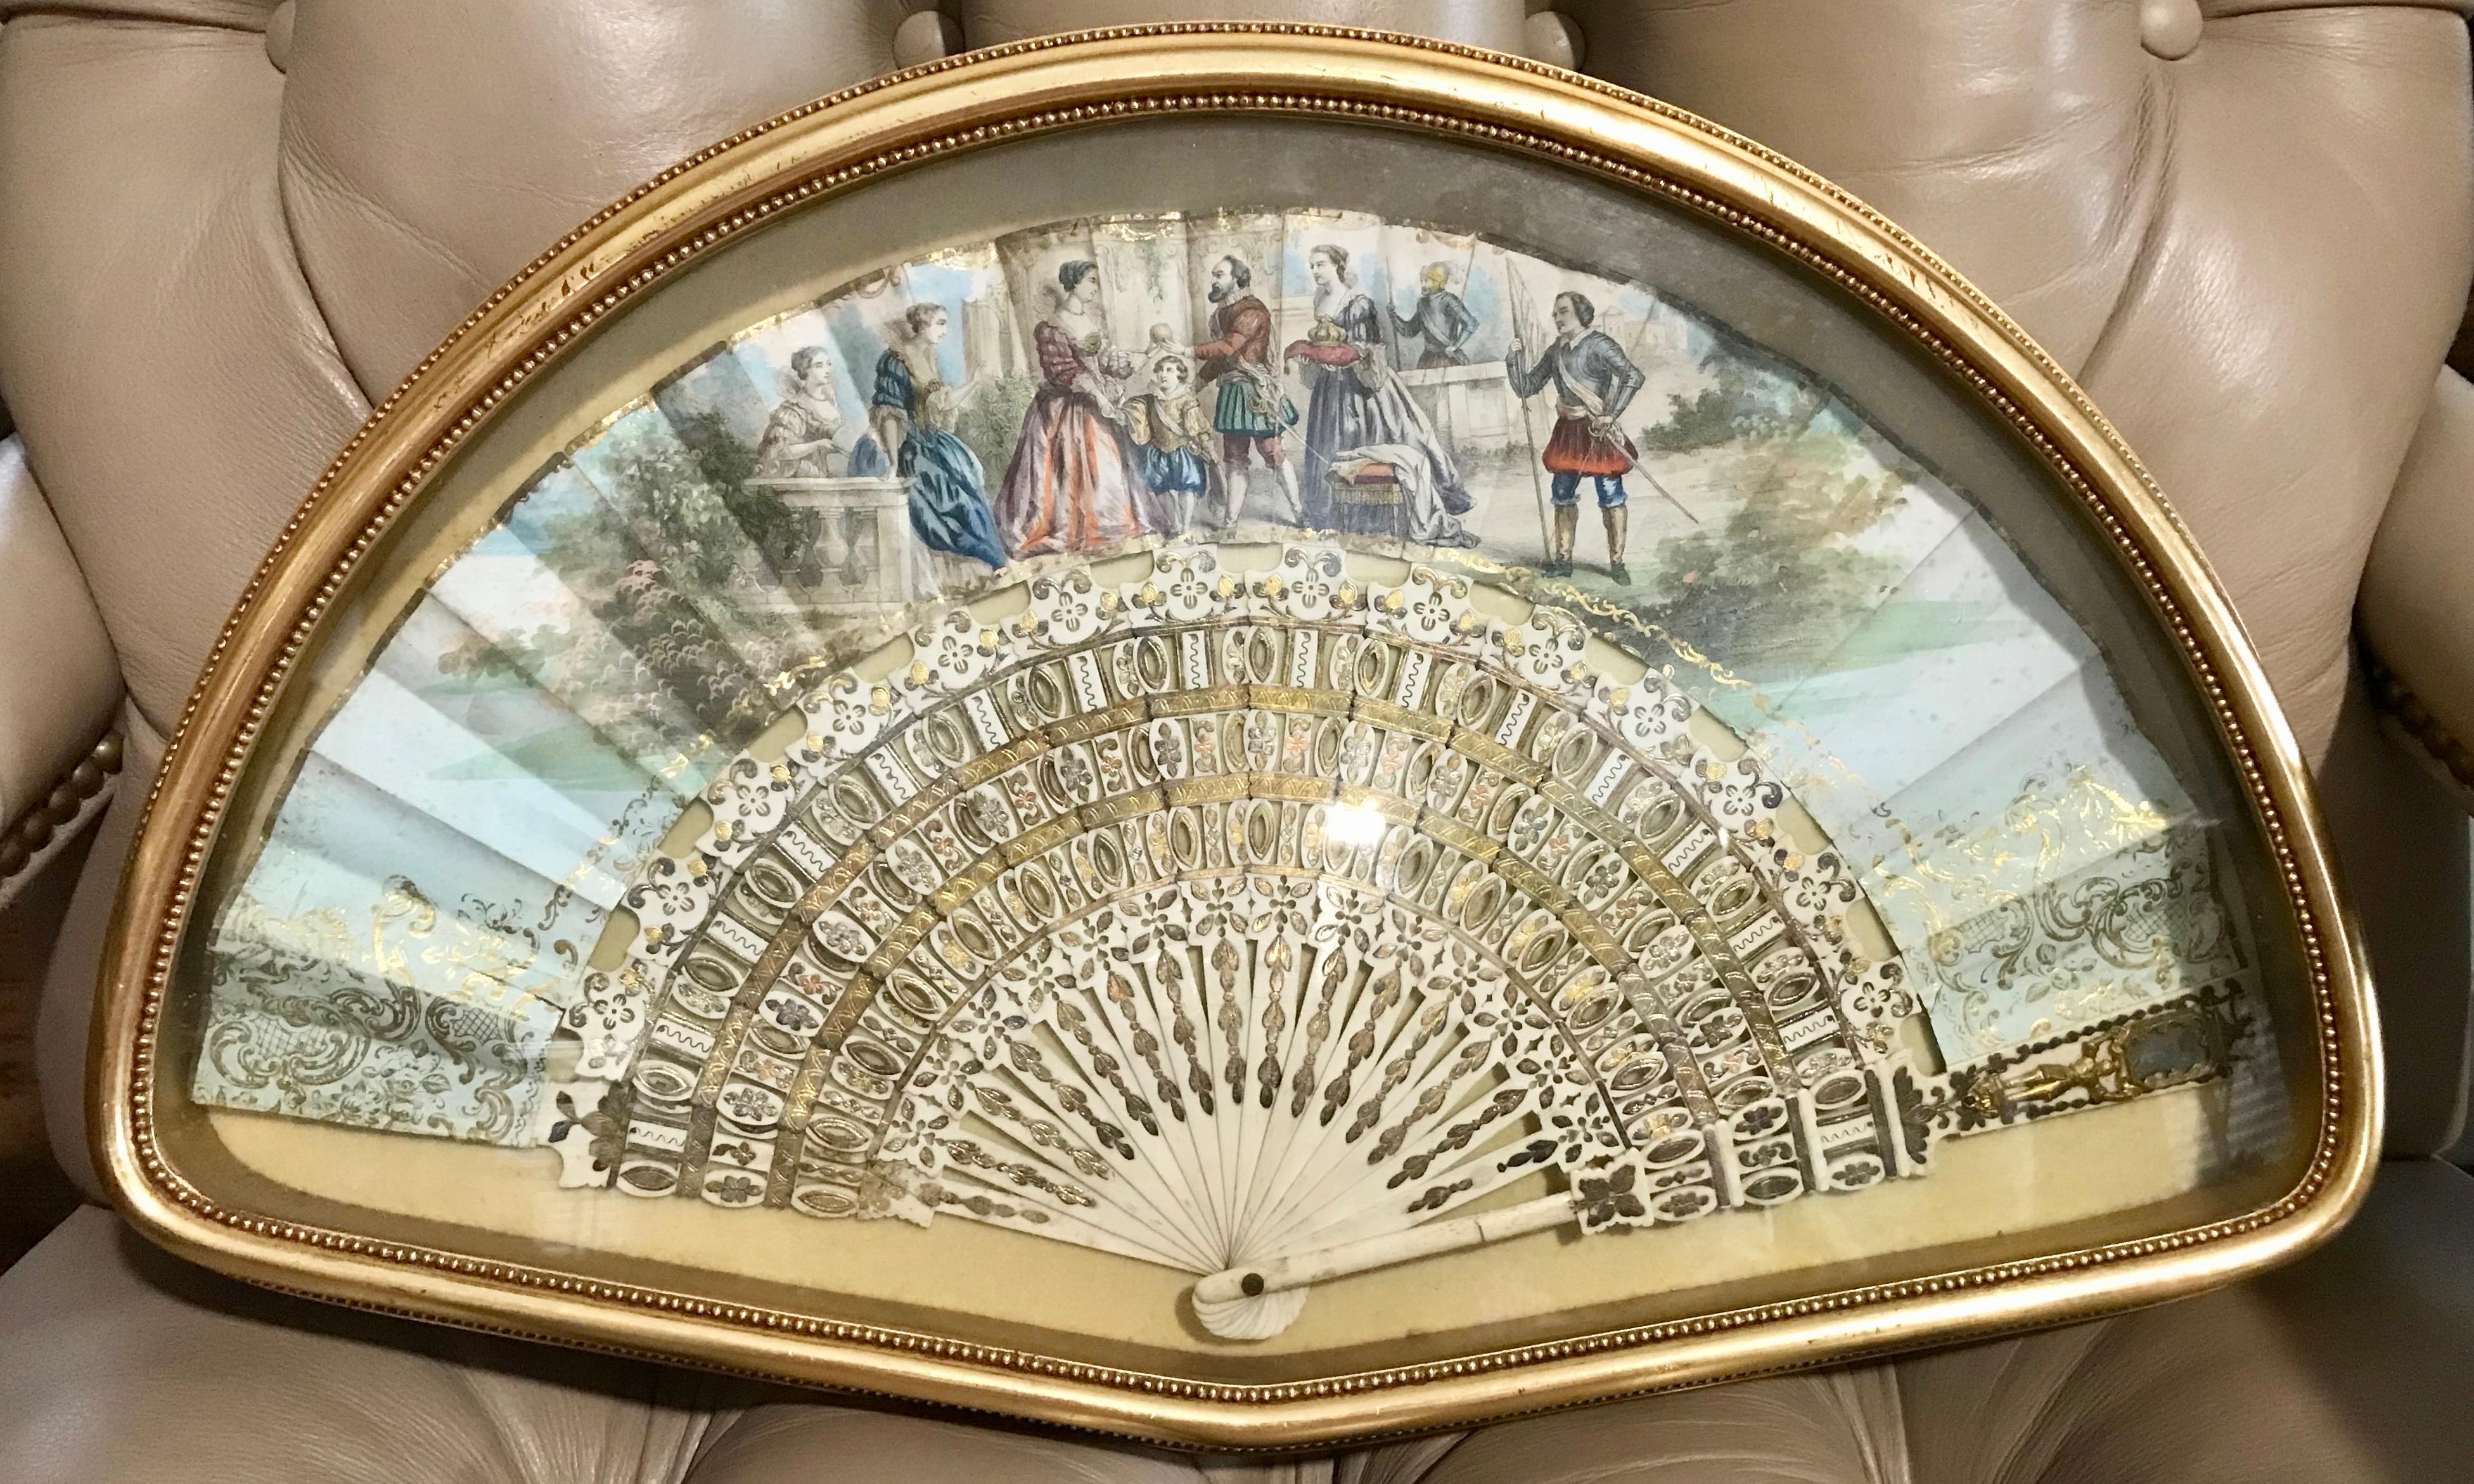 Superior quality painted with regal figures bearing a crown and gifts,
perhaps commemorating a royal event.
The fan is accented with gilt appointments and the 16 arm bone
framework is lavishly gilded and pierce carved. 
The fan is housed in a